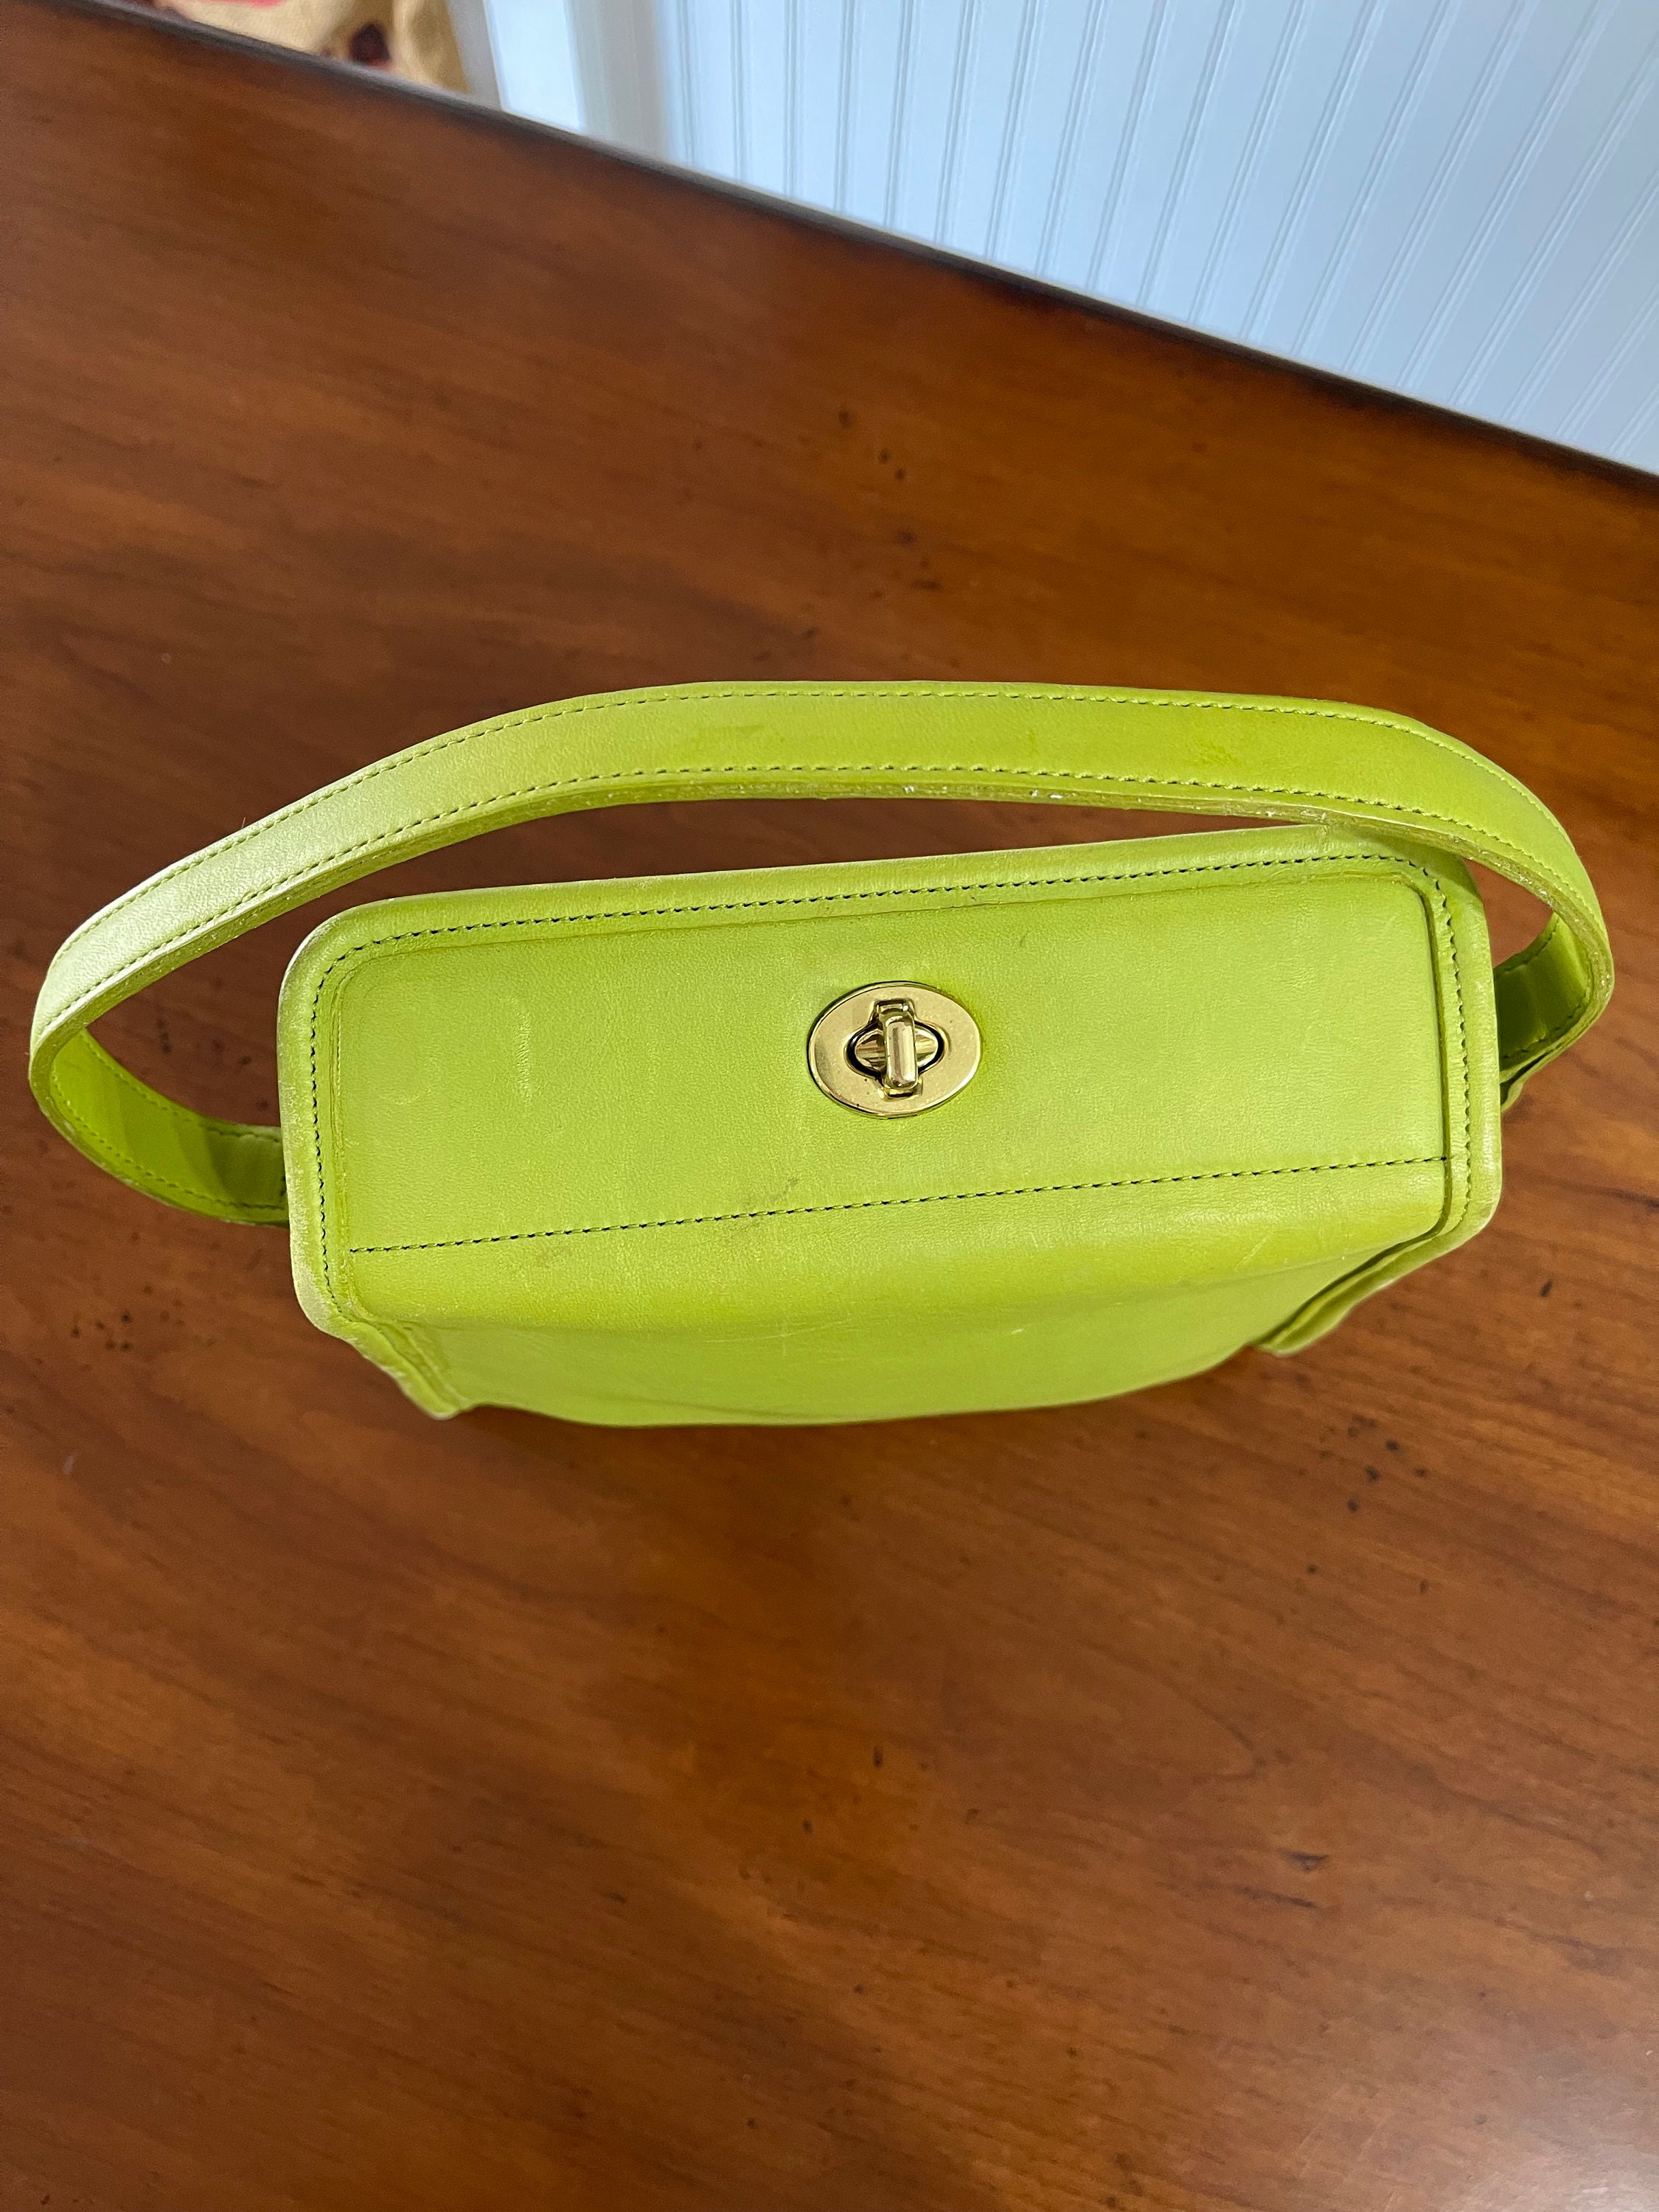 Any Coach bag collectors out there? Check this rare lime green geometr